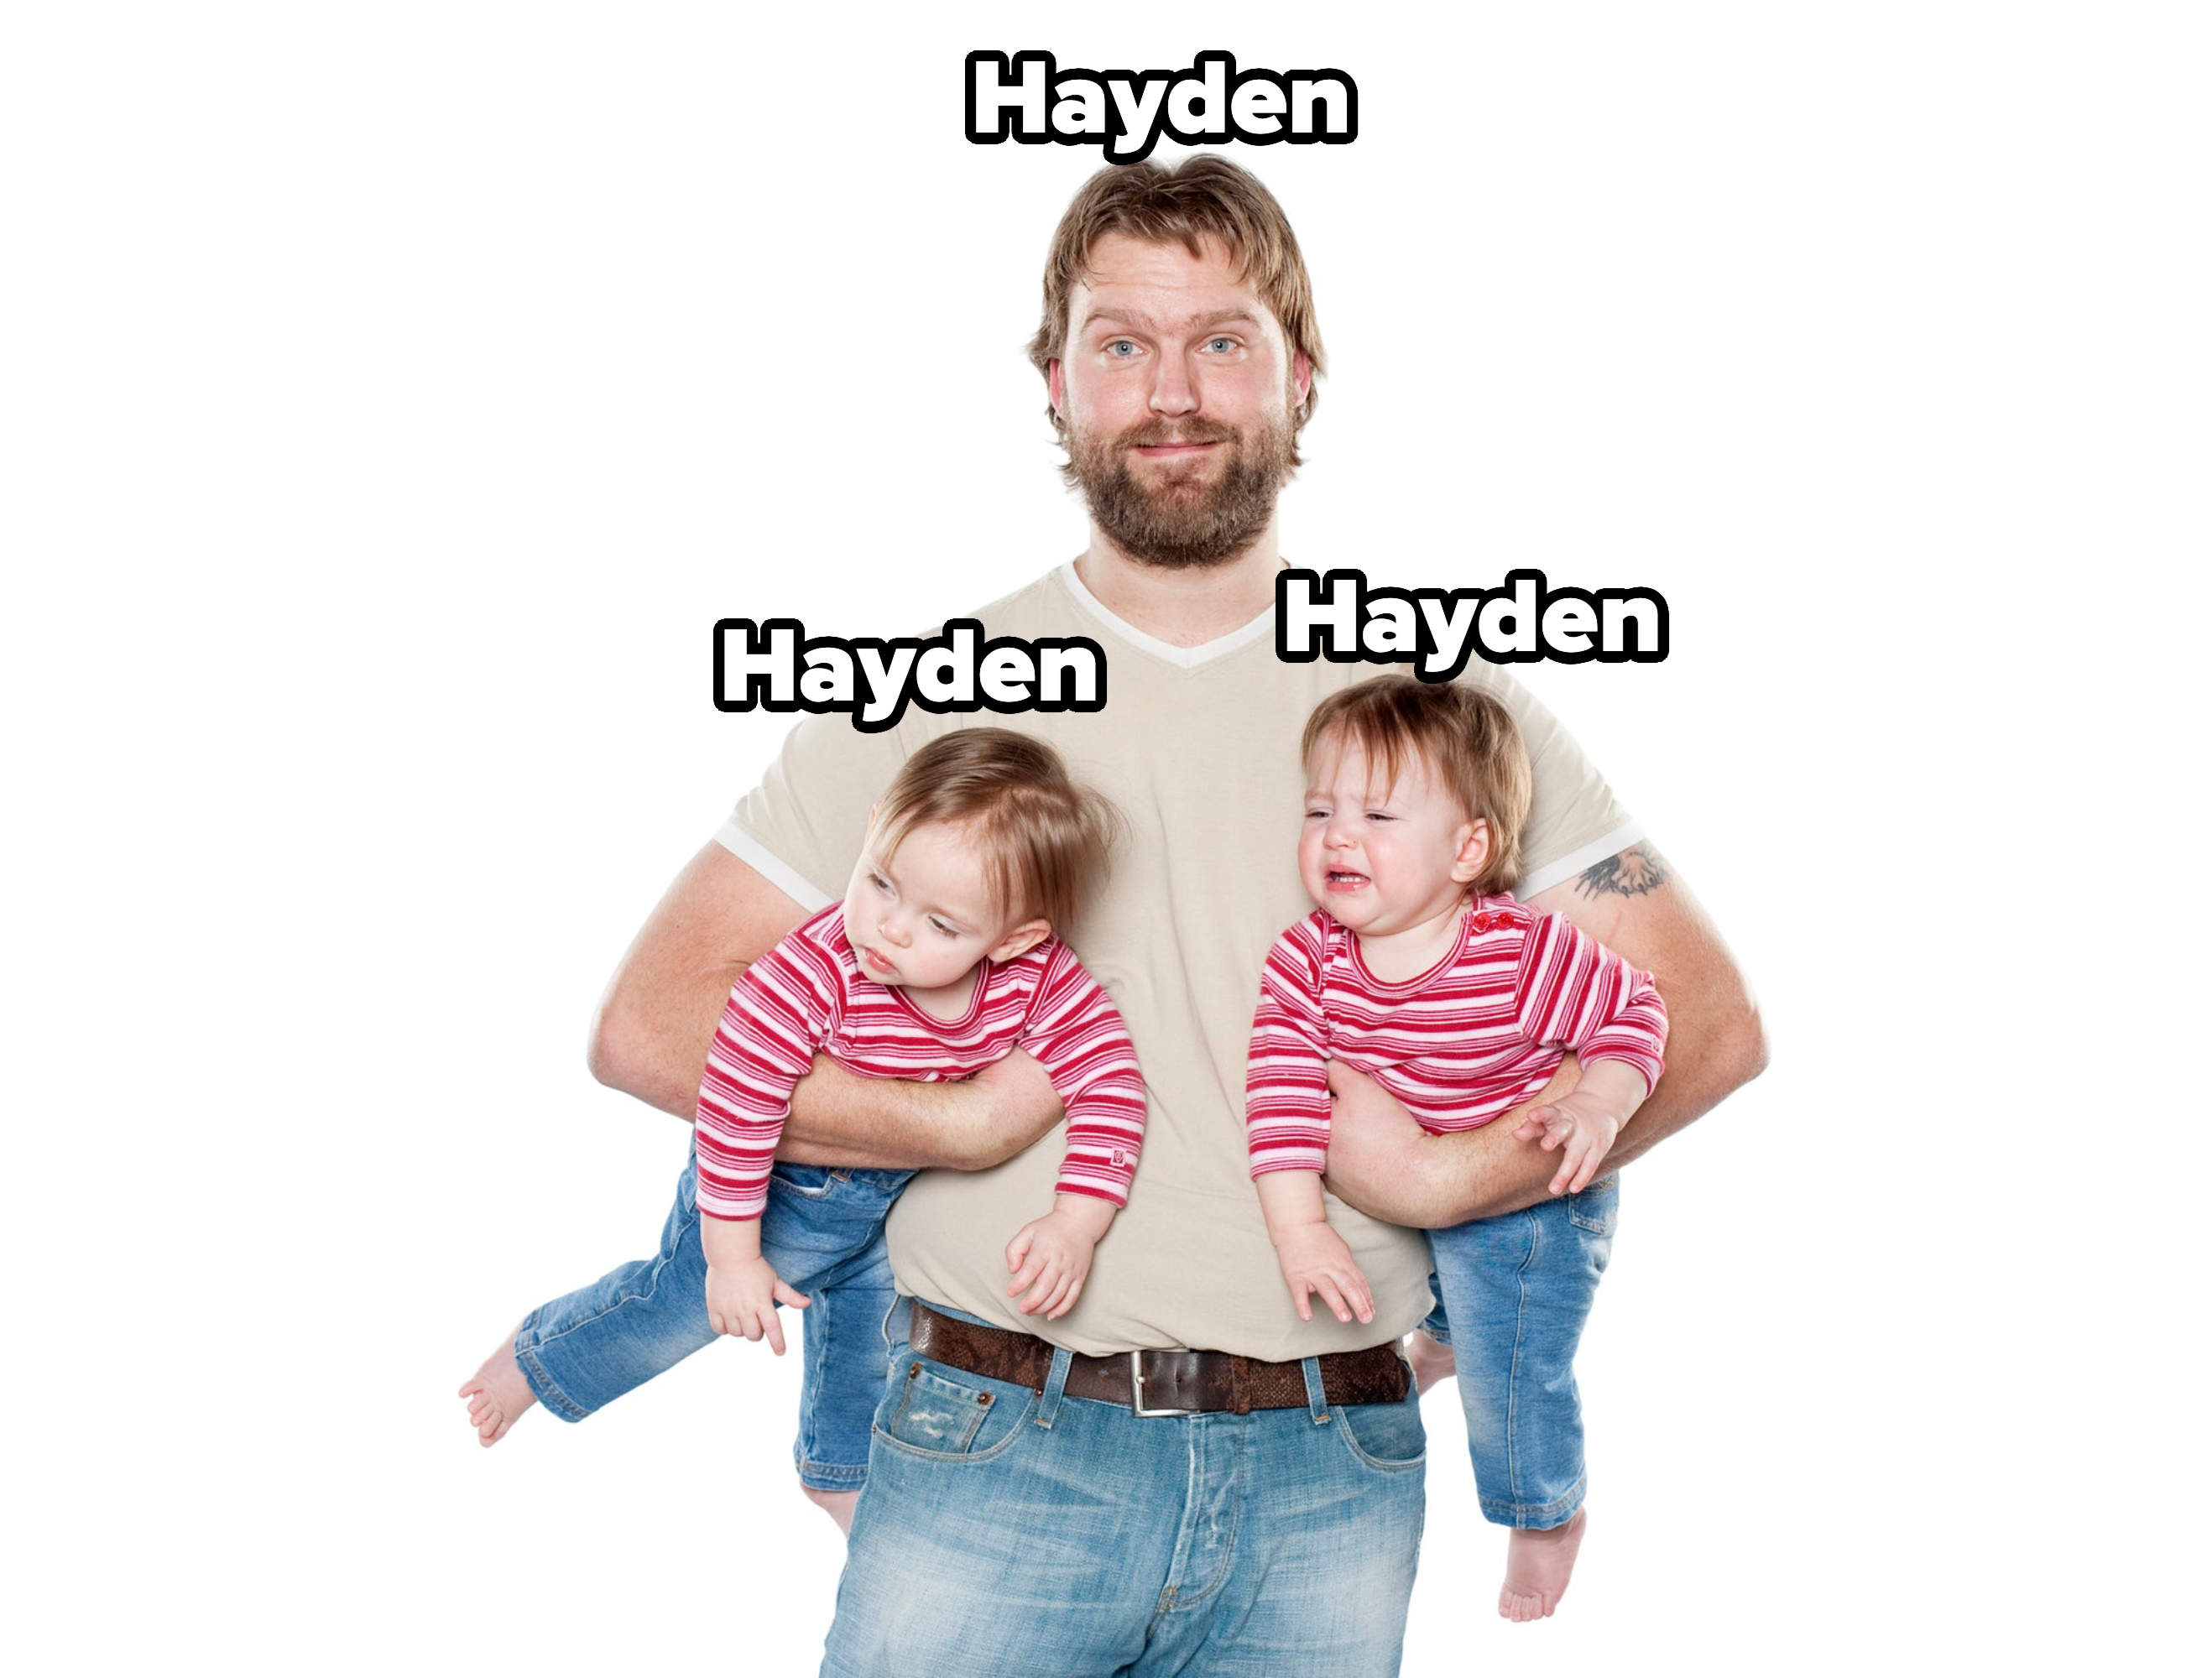 A guy holding twins, all with the name Hayden